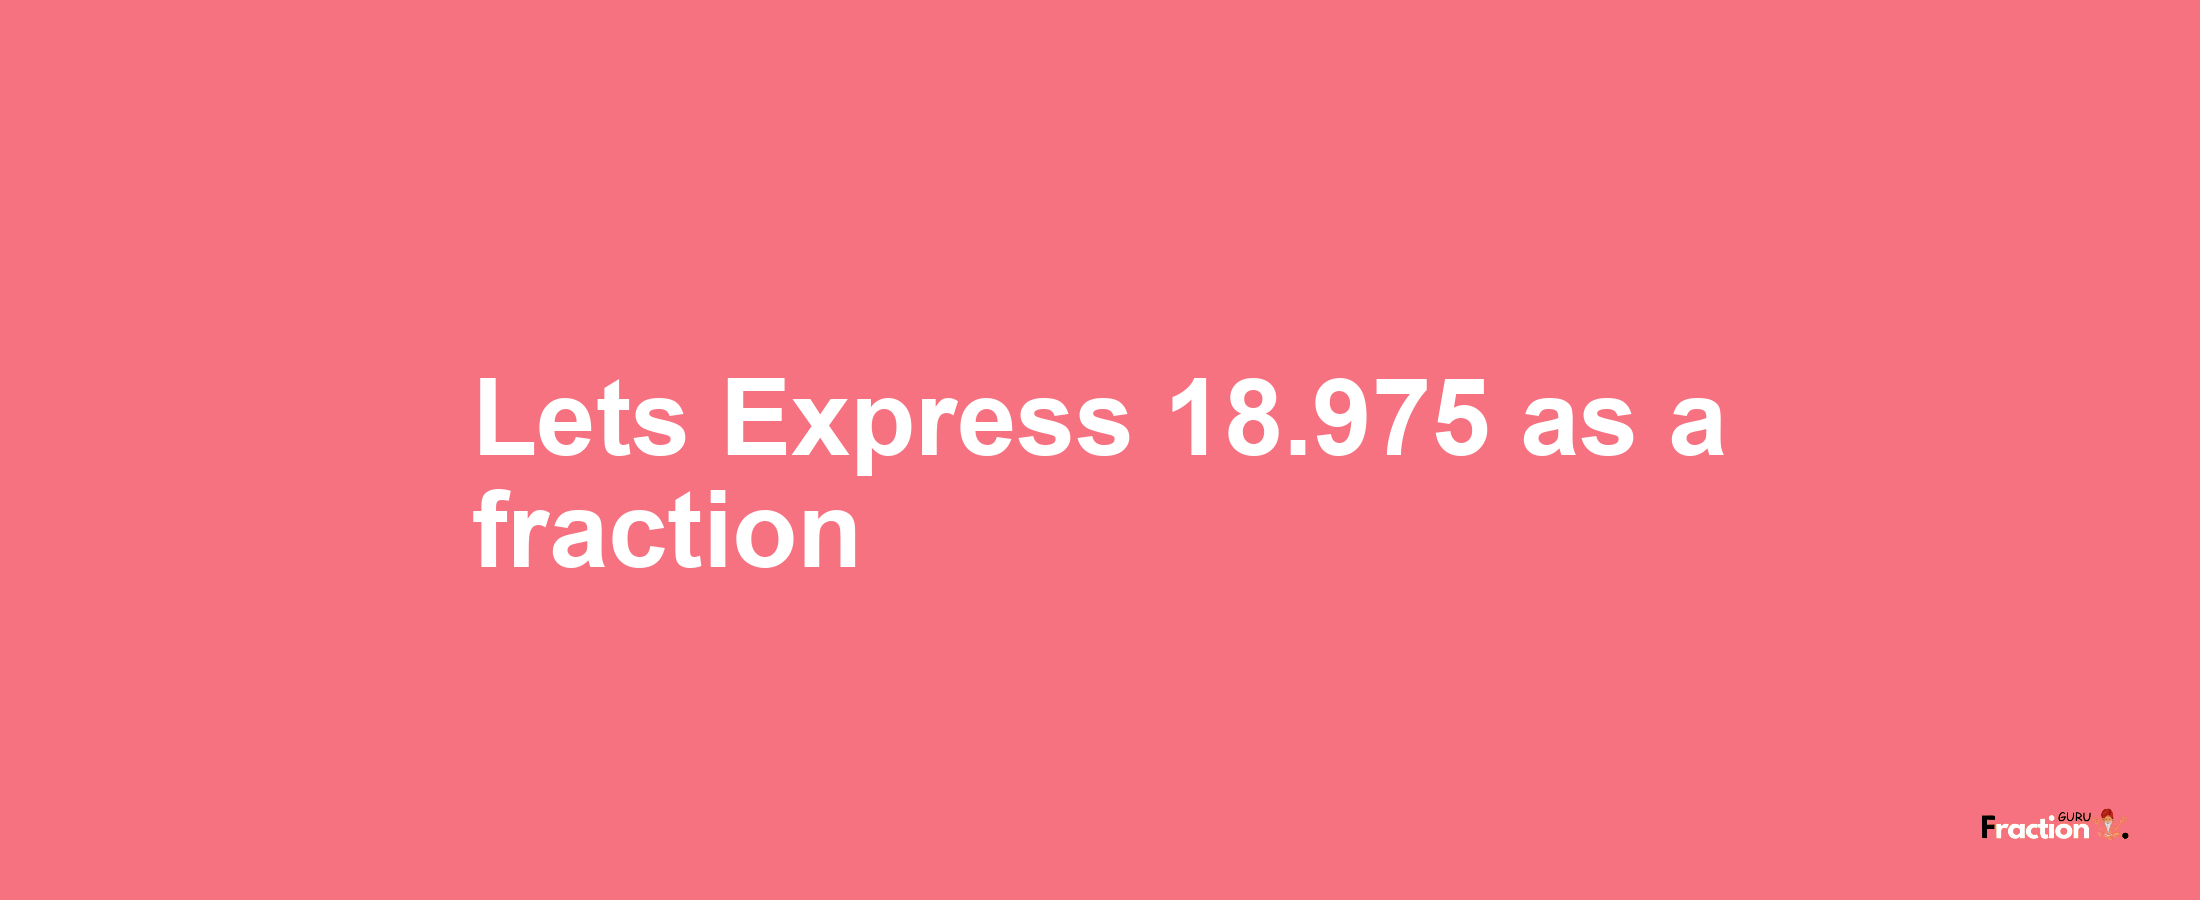 Lets Express 18.975 as afraction